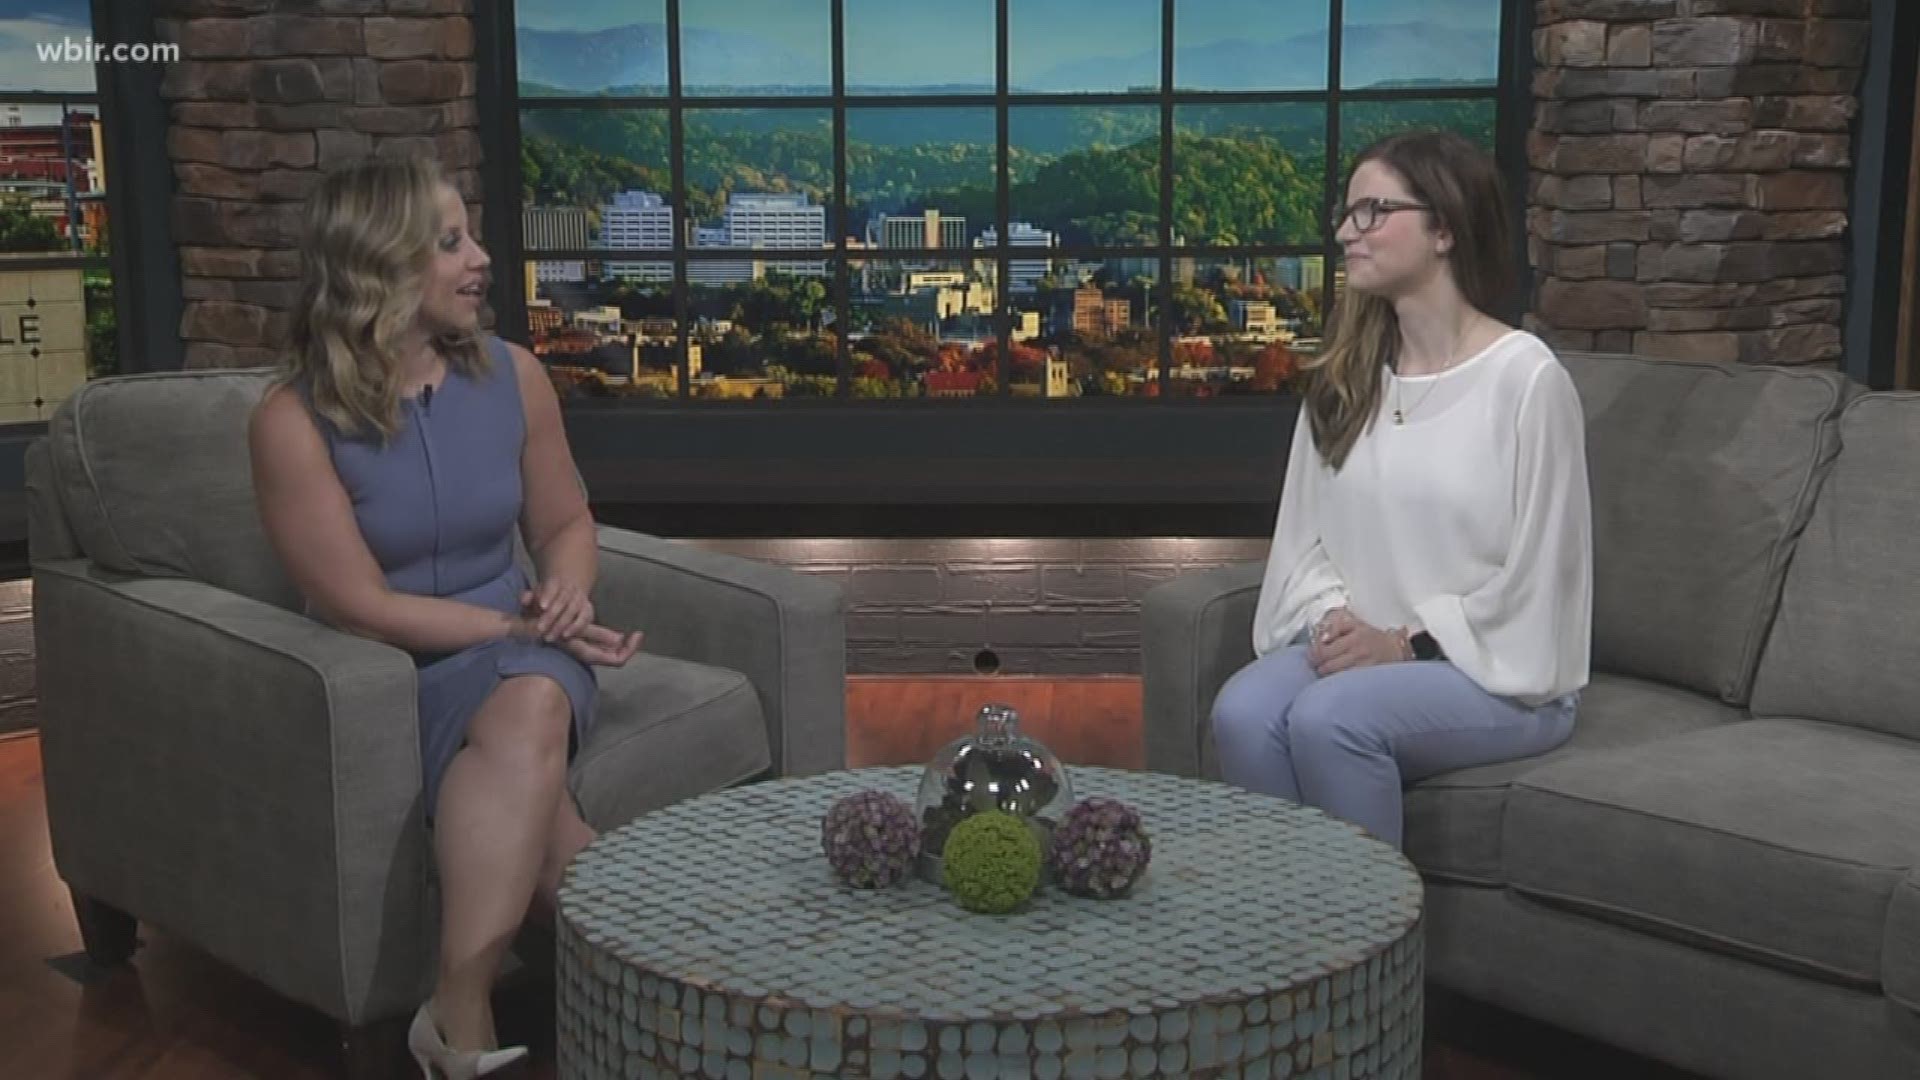 Lauren Morgan from Knoxville Moms Blog talks about May Madness and discussing tips to thrive in it.